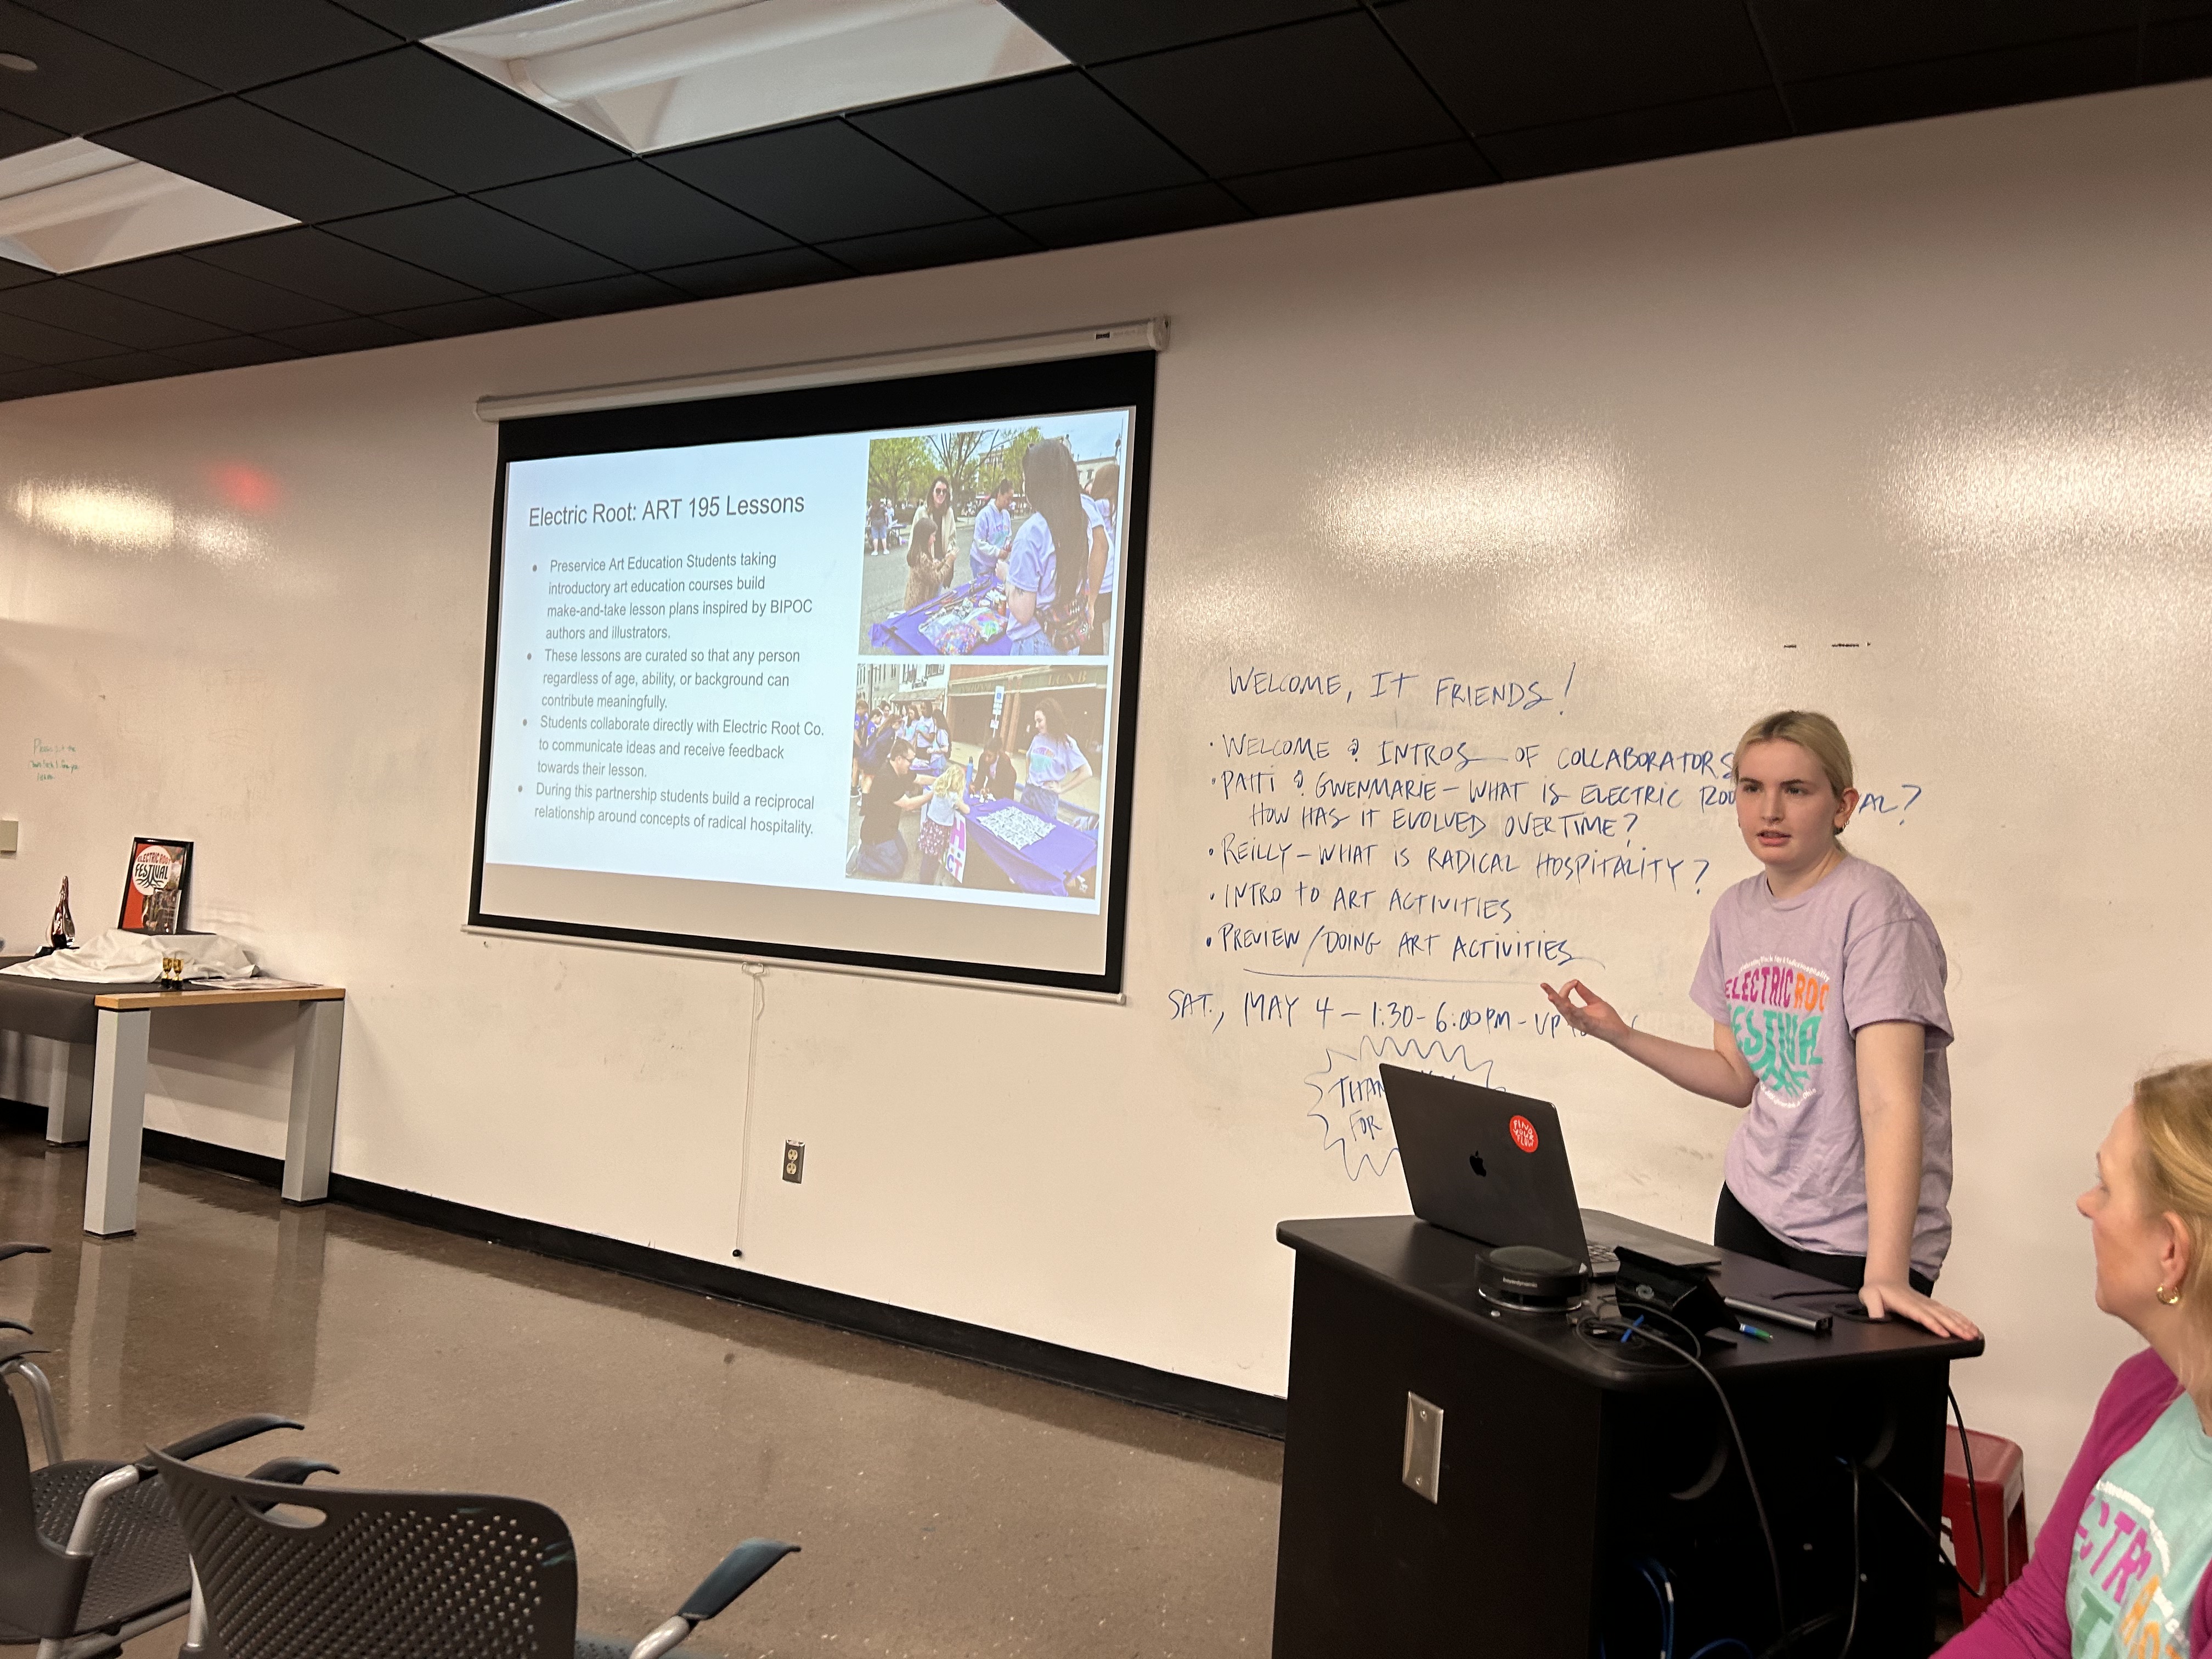 Reilly Powers, a femme-presenting person with long blonde hair and a purple shirt, stands at a classroom podium giving a presentation about radical hospitality